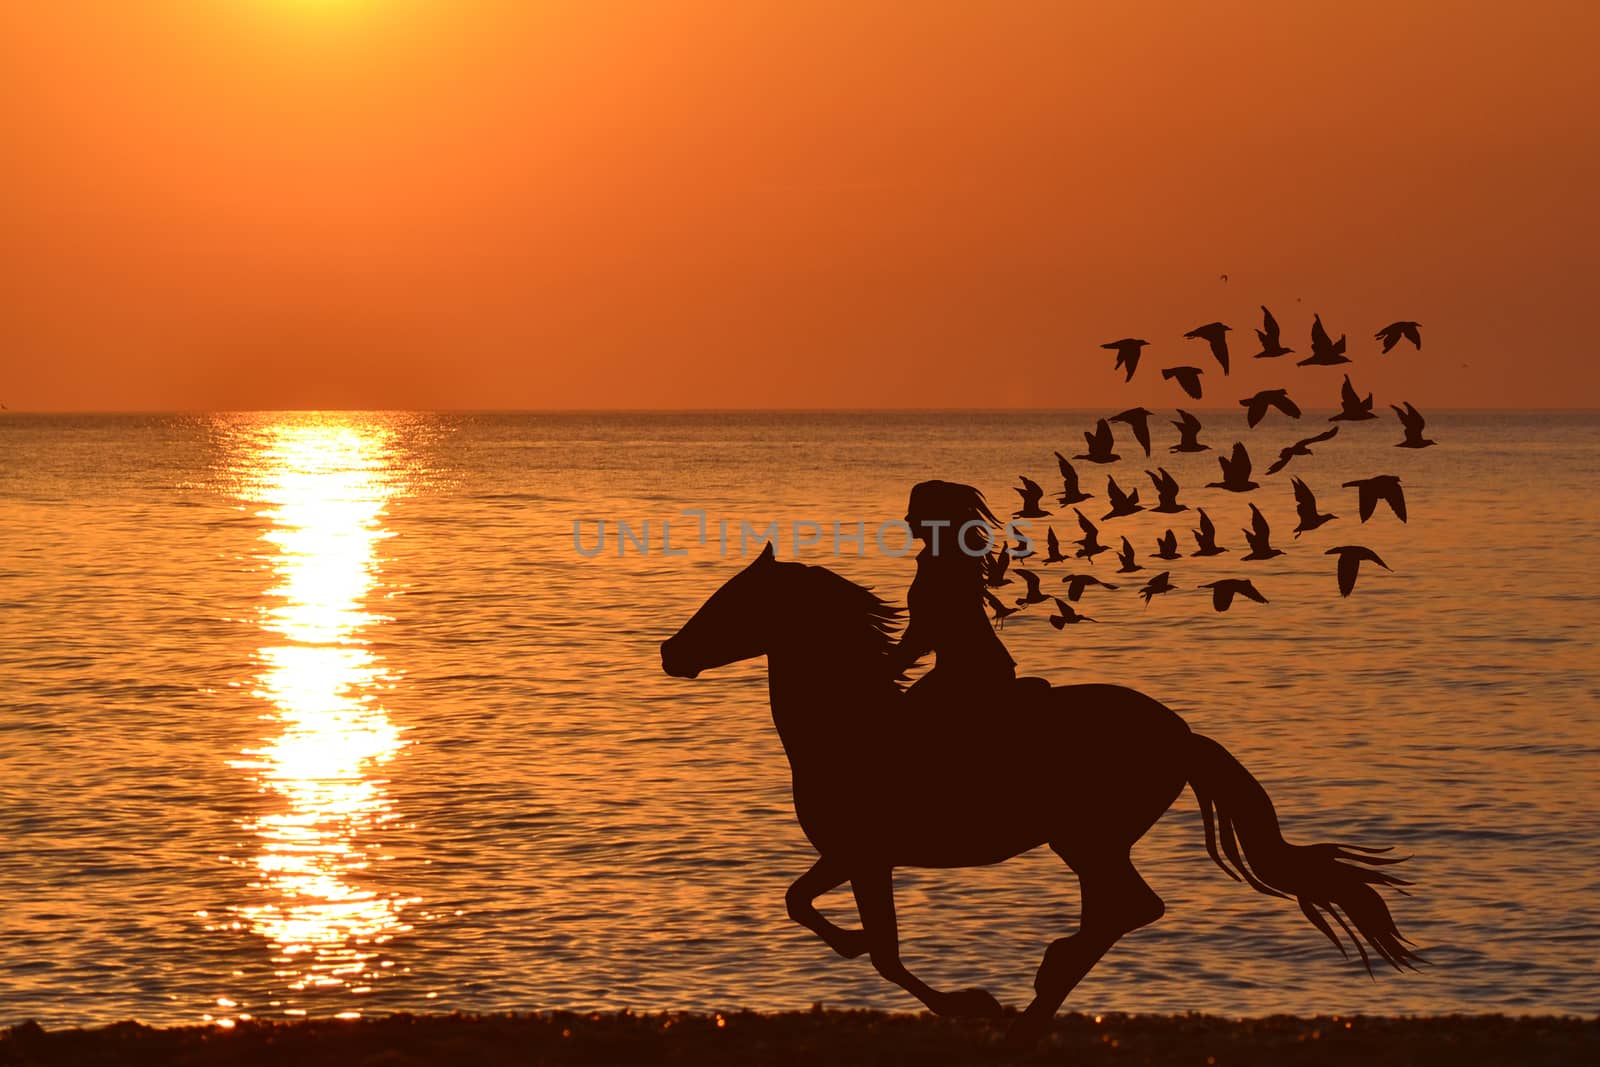 Abstract woman riding a horse with birds flying from her hair at sunrise